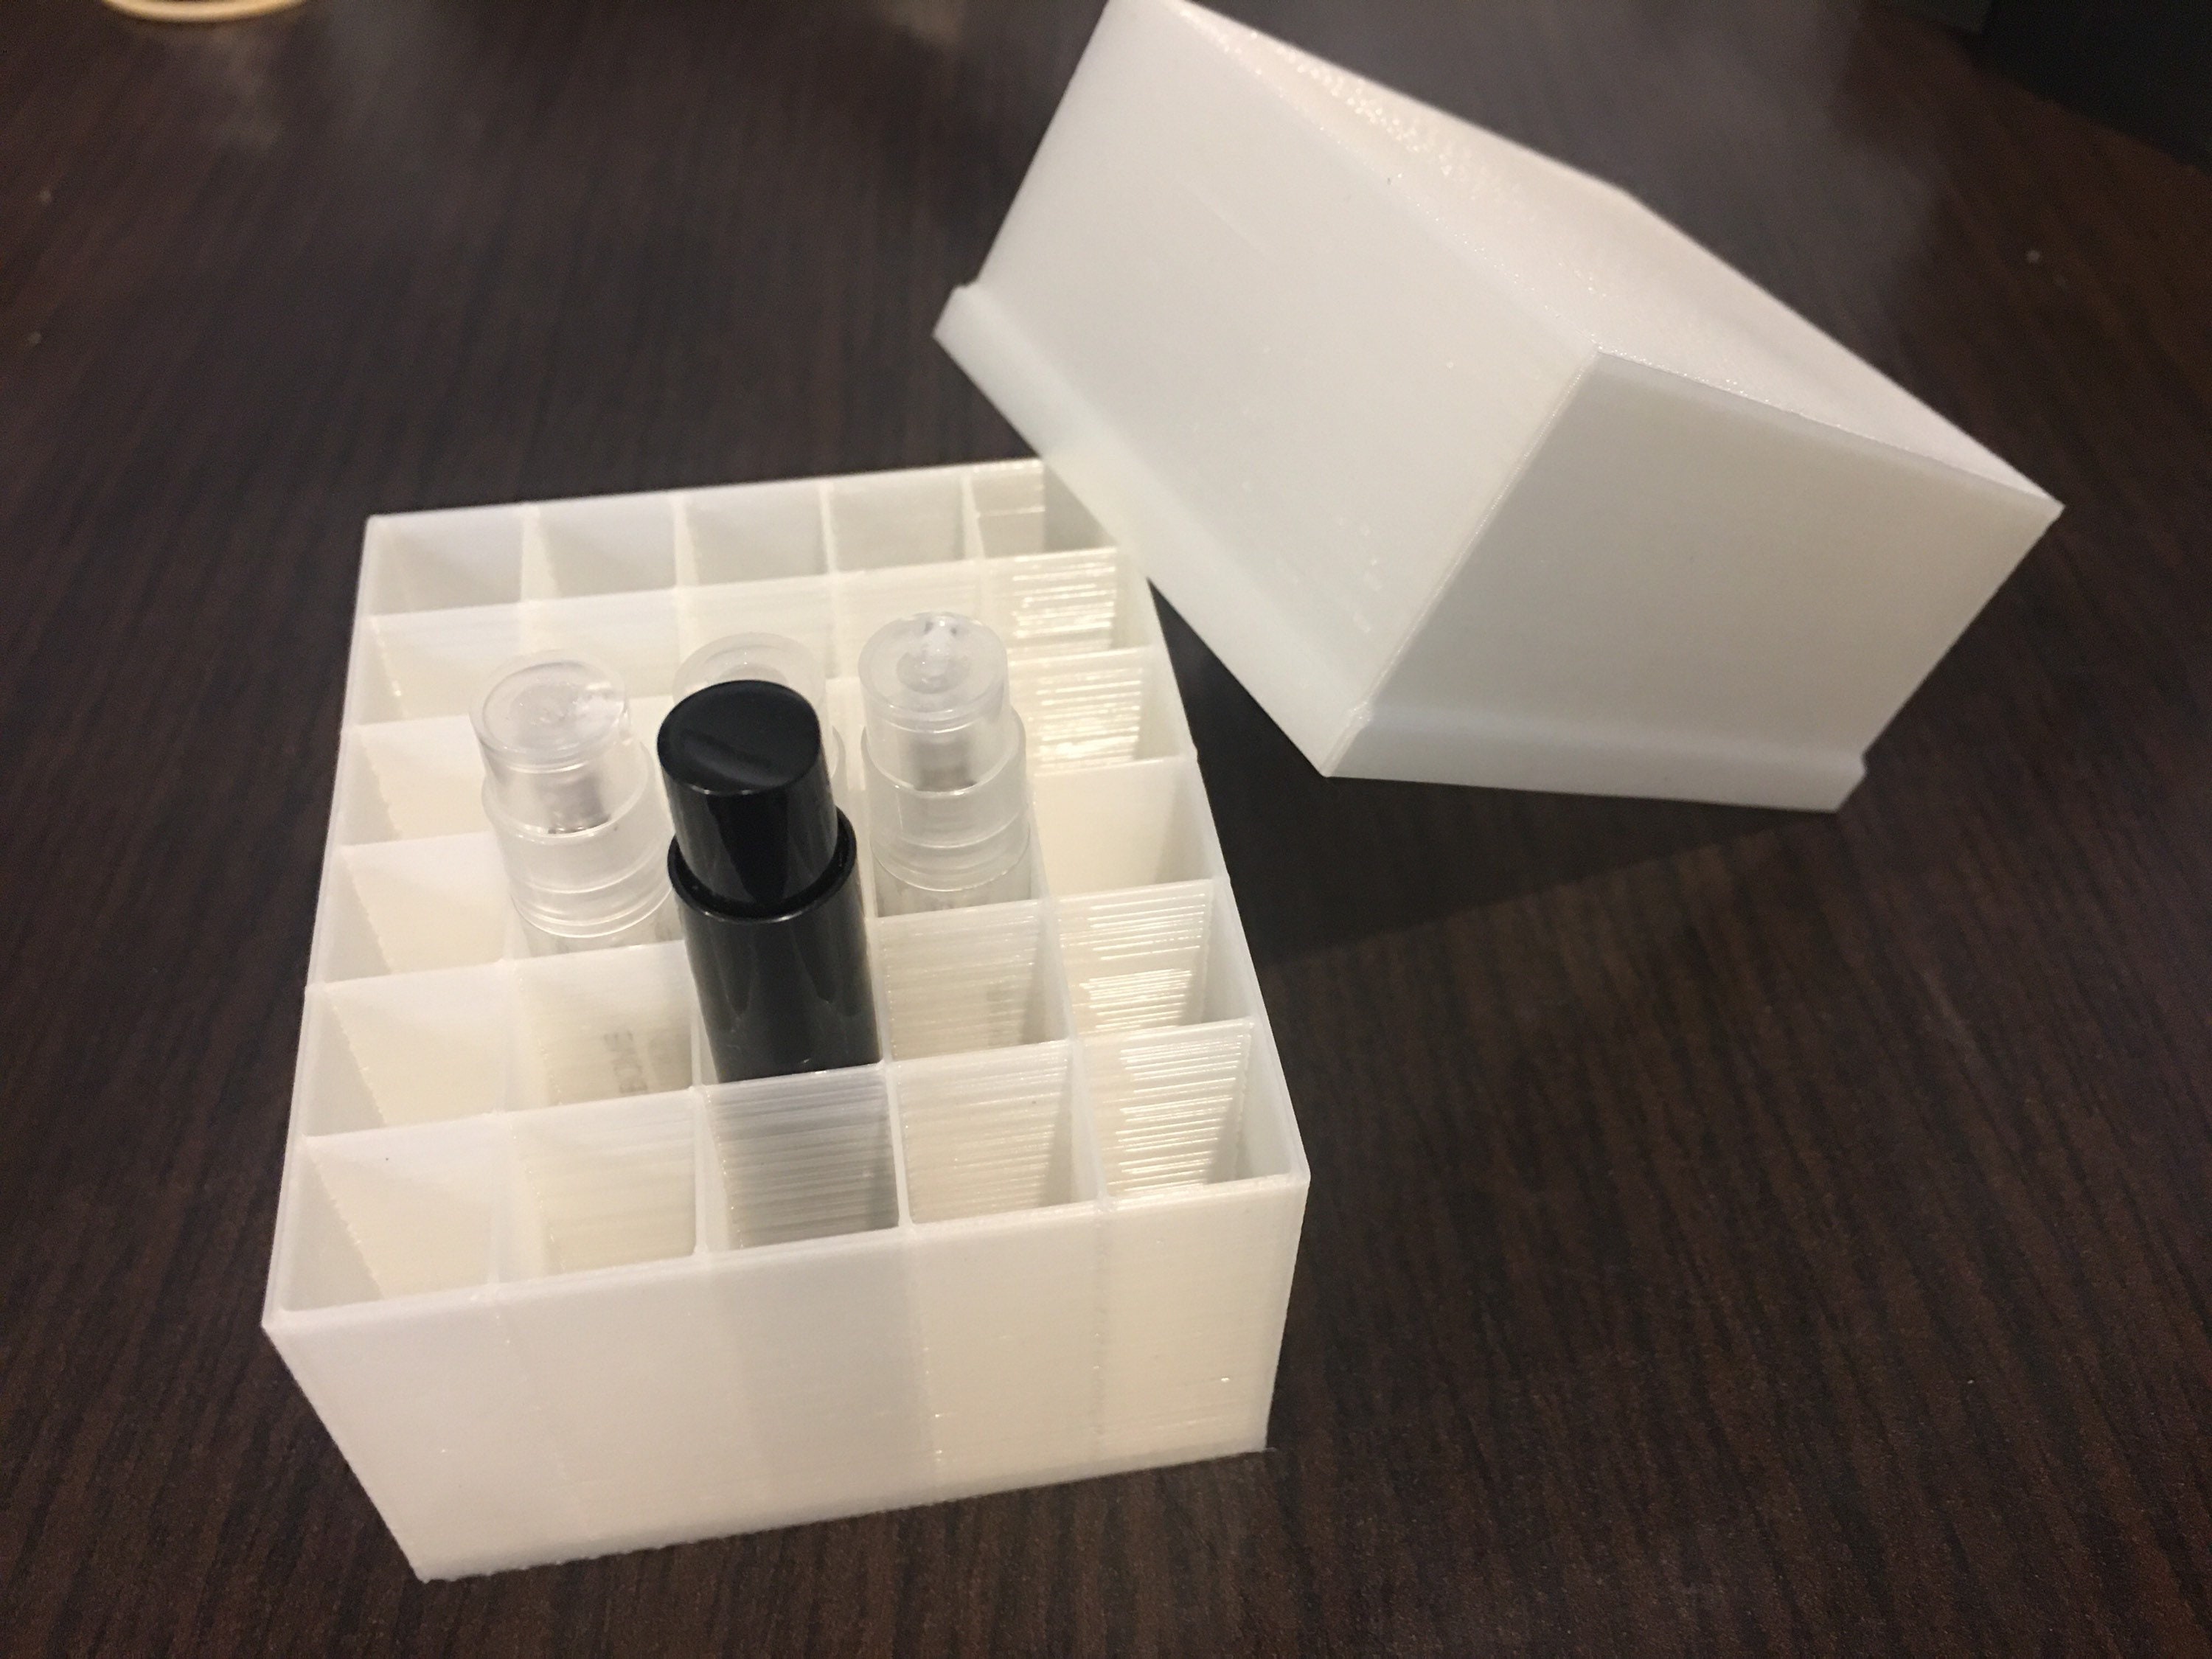 1ml Sample Vial Holder for Bottles Without Spray Caps Microperfume 